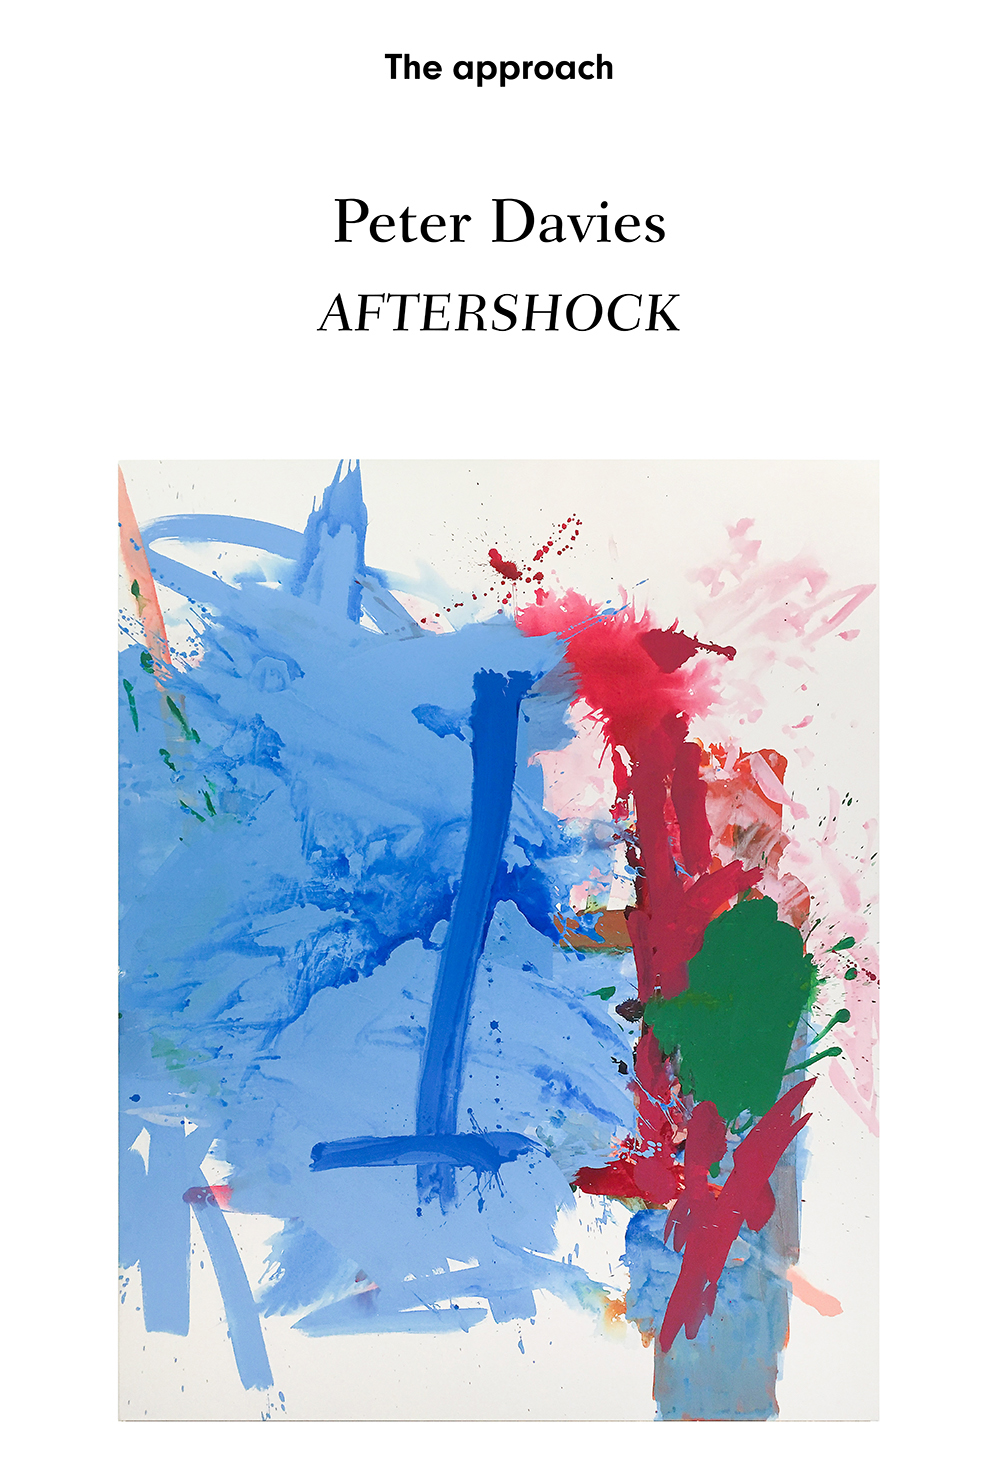 Peter Davies - Aftershock - The Approach